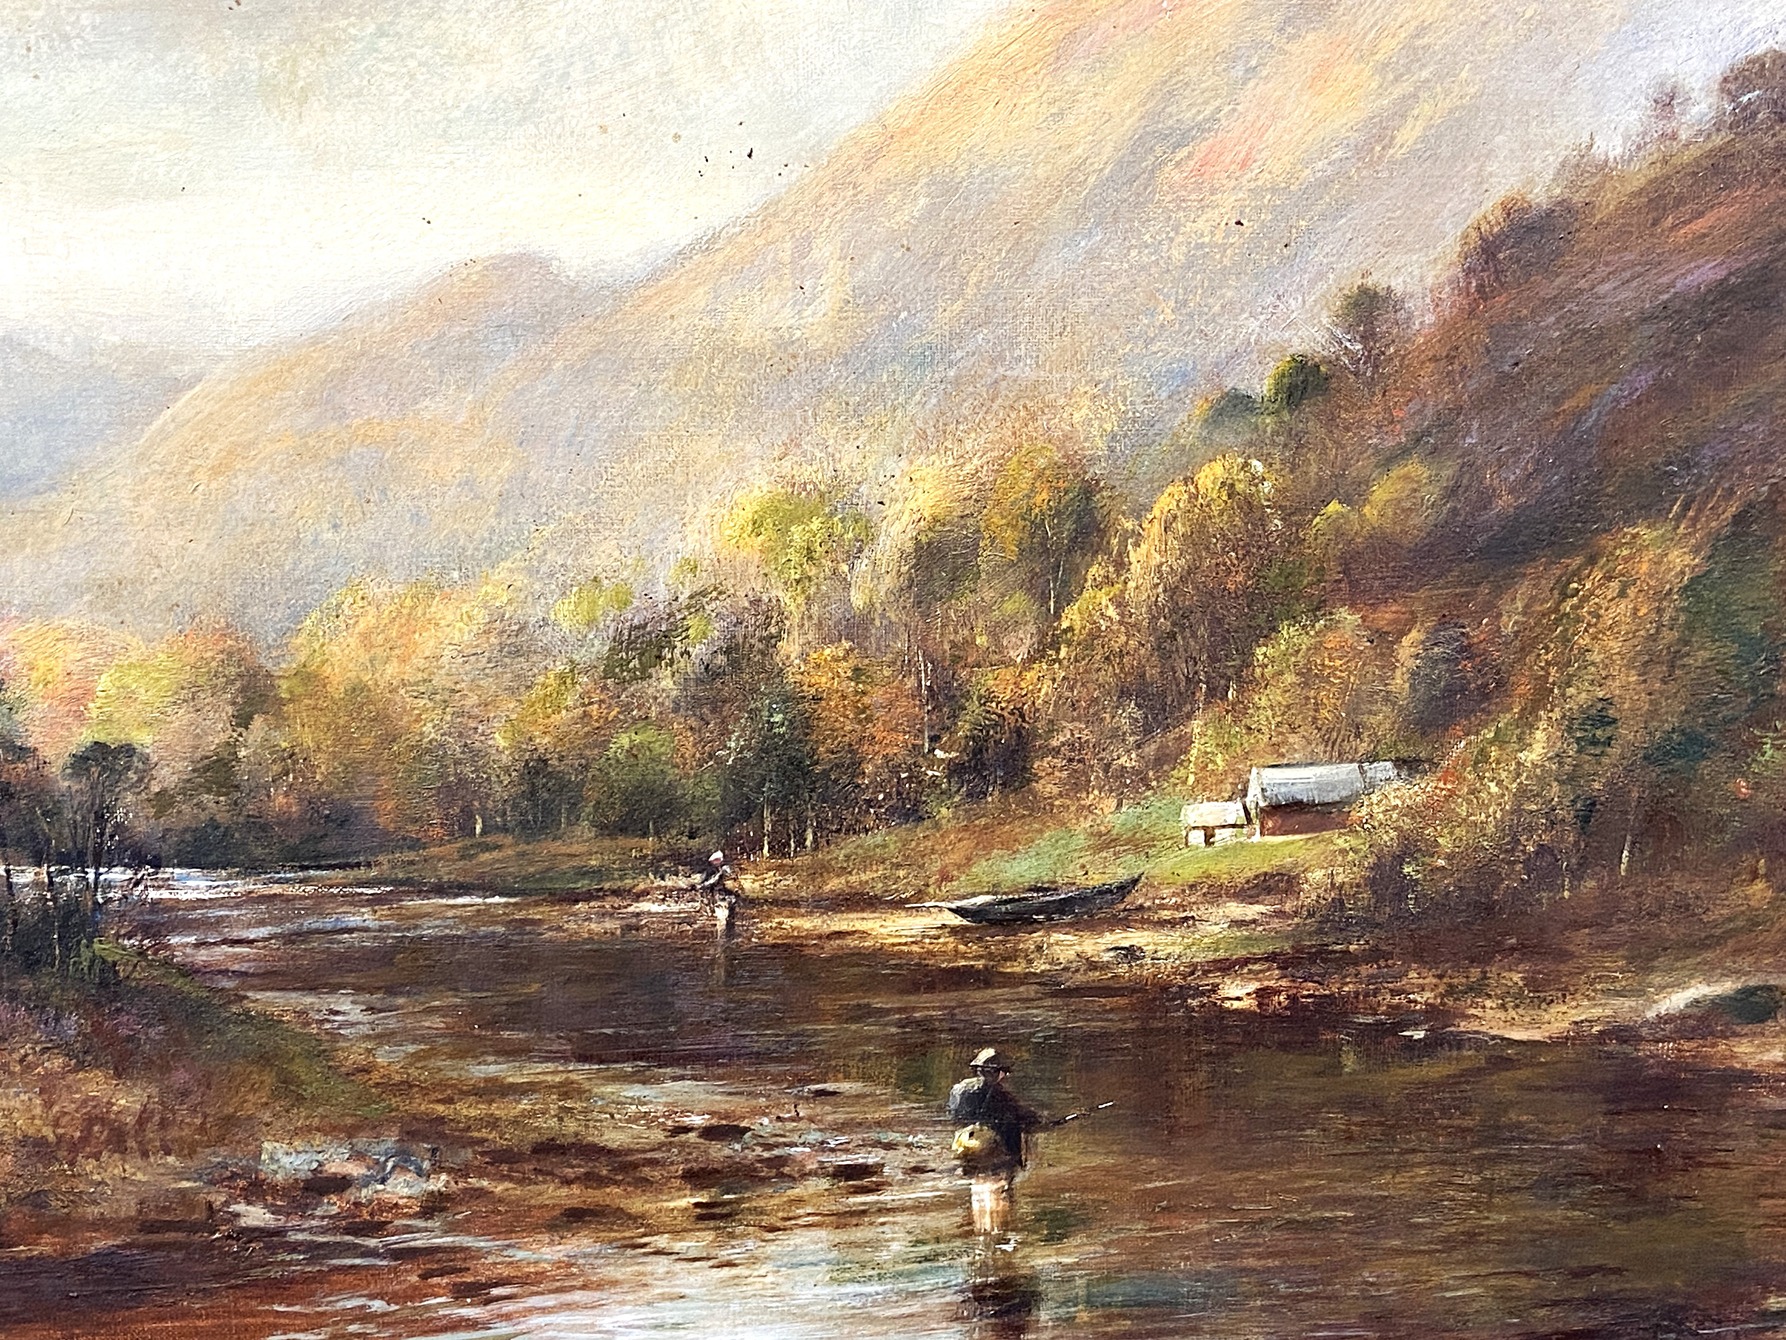 J.L MACDONALD, Scottish, 19th century, Fly Fishing in the Highlands,  oil on canvas, signed LL: J.